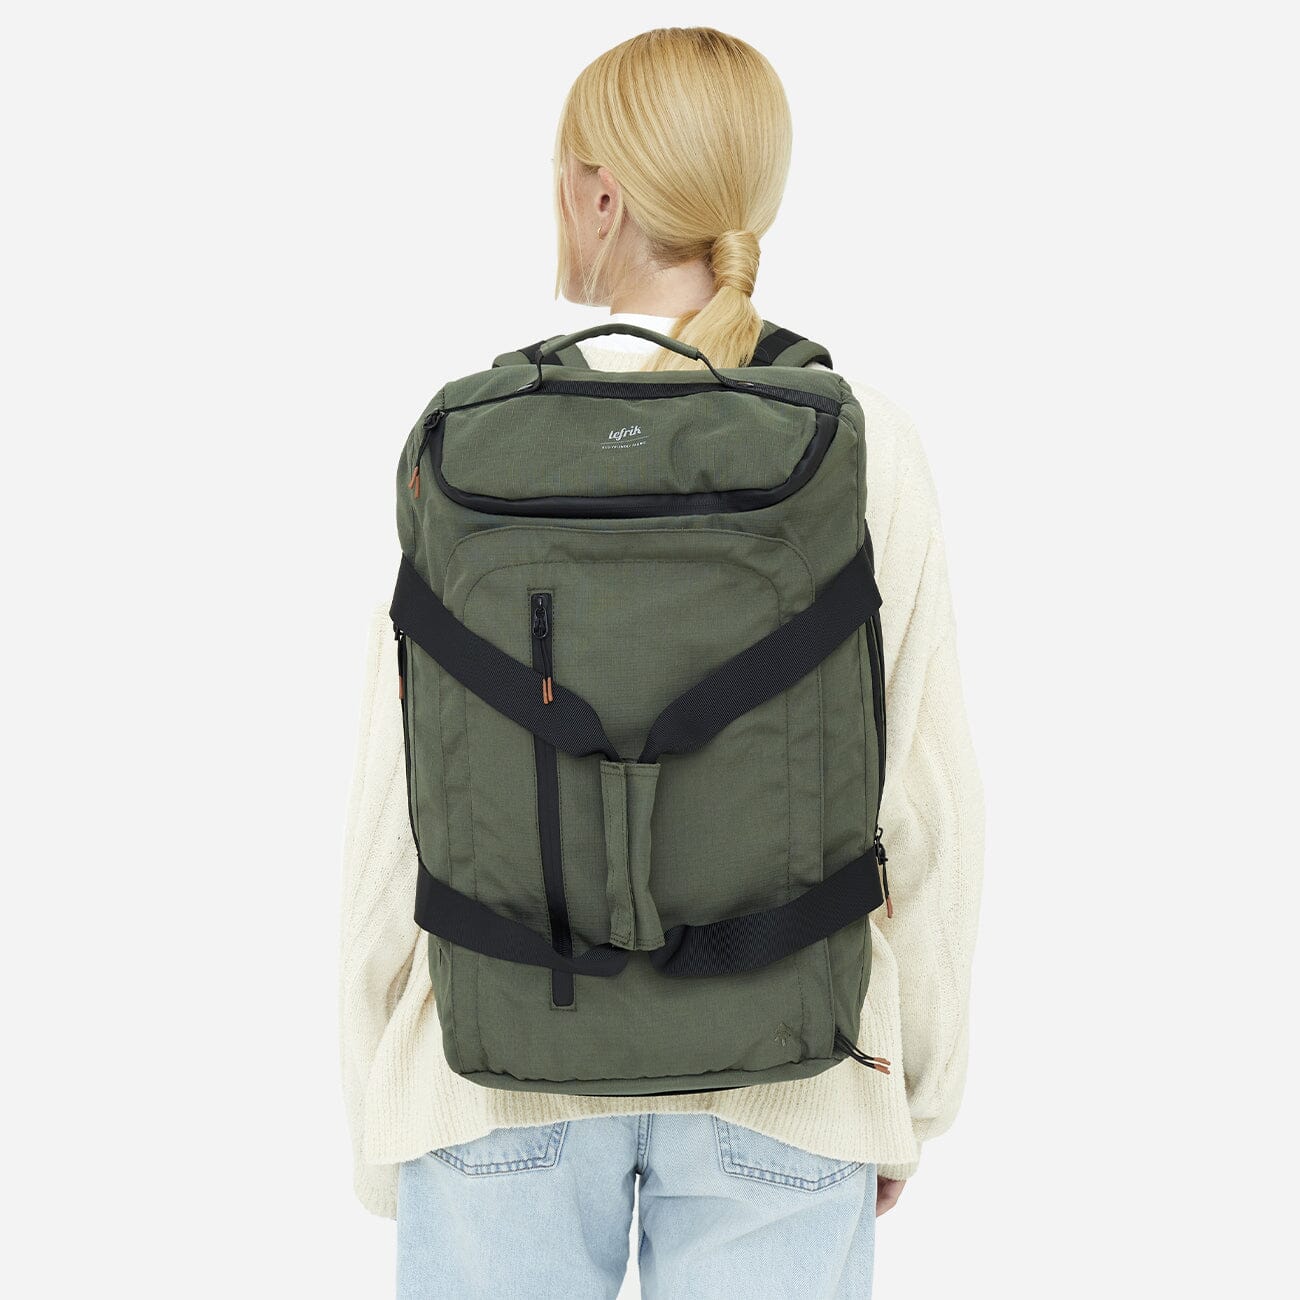 Woman wearing green eco-friendly convertible backpack, back view